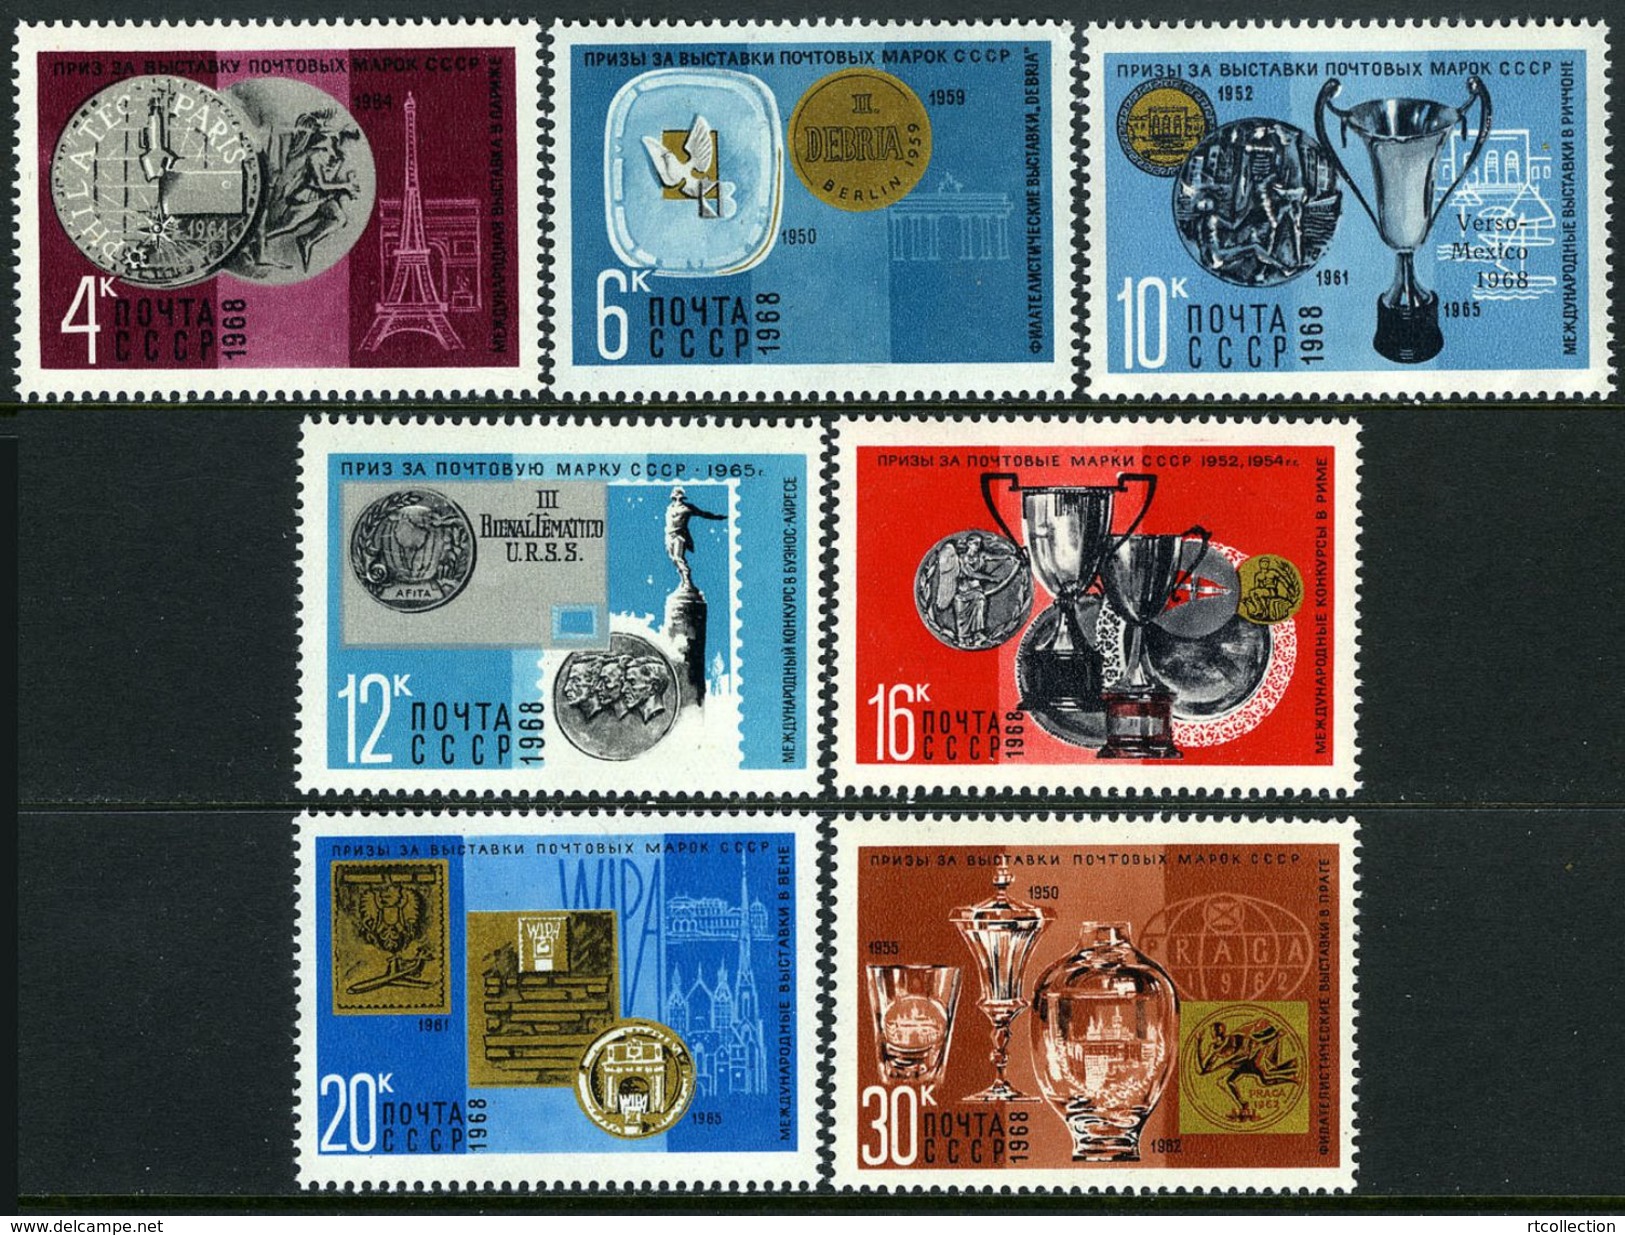 USSR Russia 1968 Award Soviet Post Office Medals Cups Philatelic Prize History Stamps Mi 3559-65 Sc 3534-40 SG#3622-28 - Post